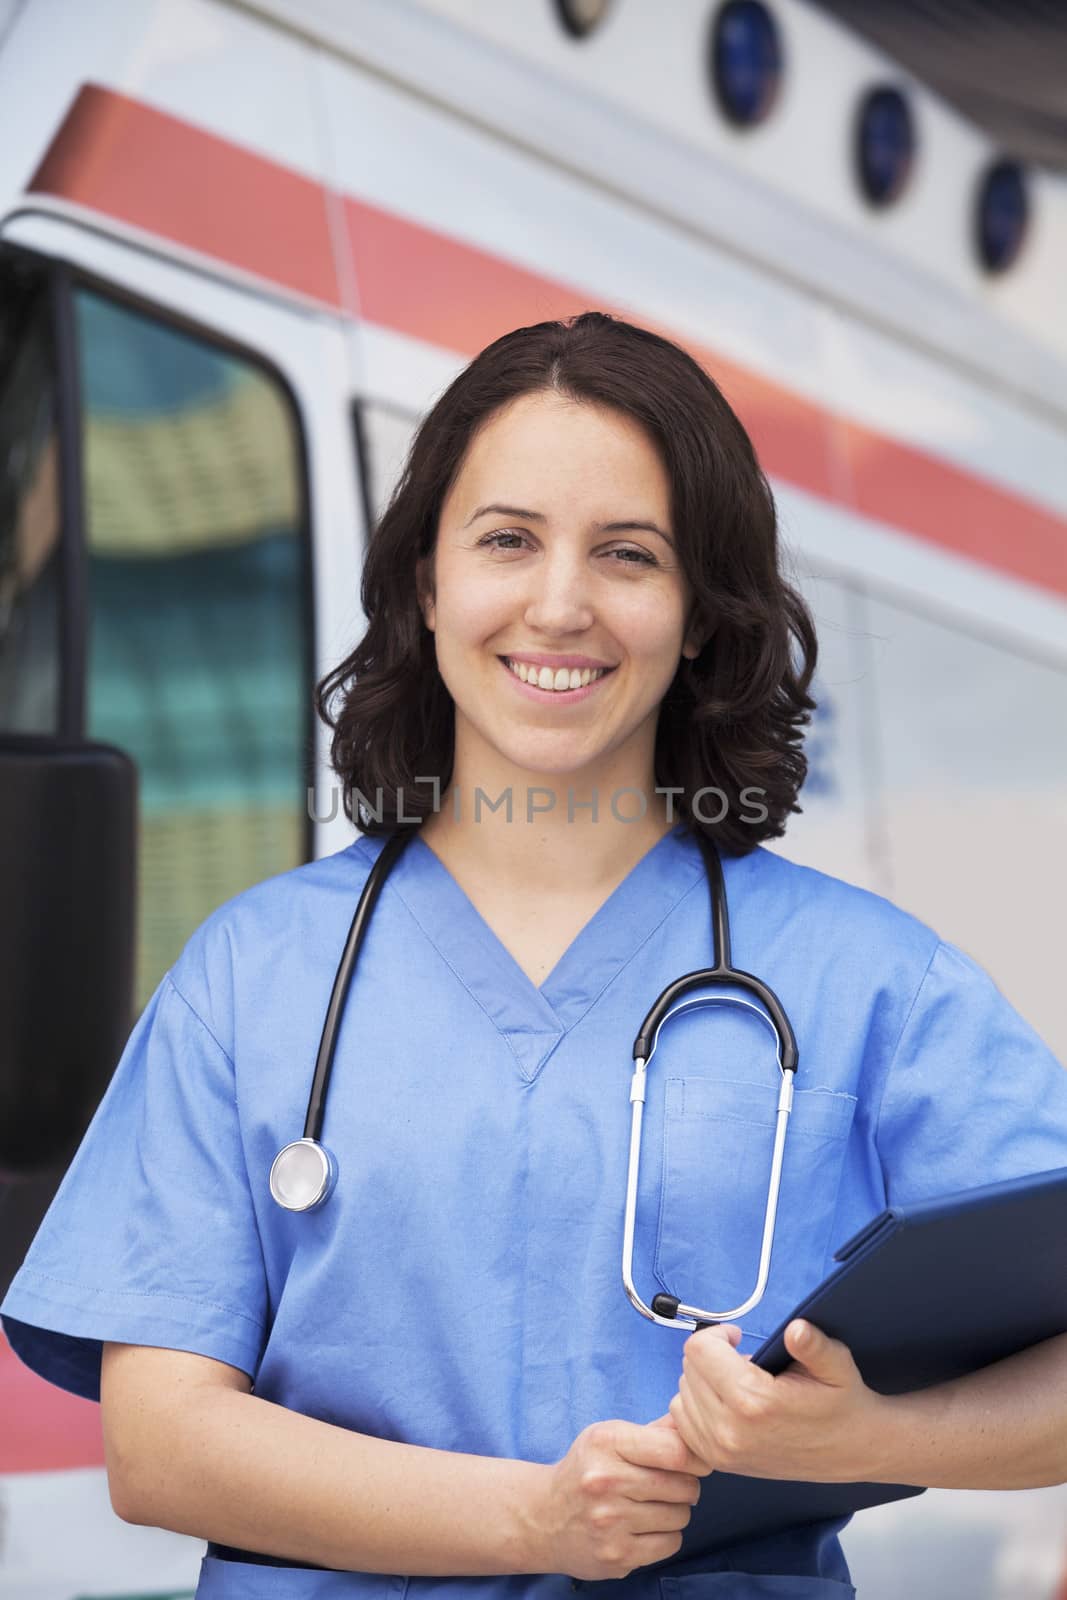 Portrait of smiling female paramedic in front of am ambulance